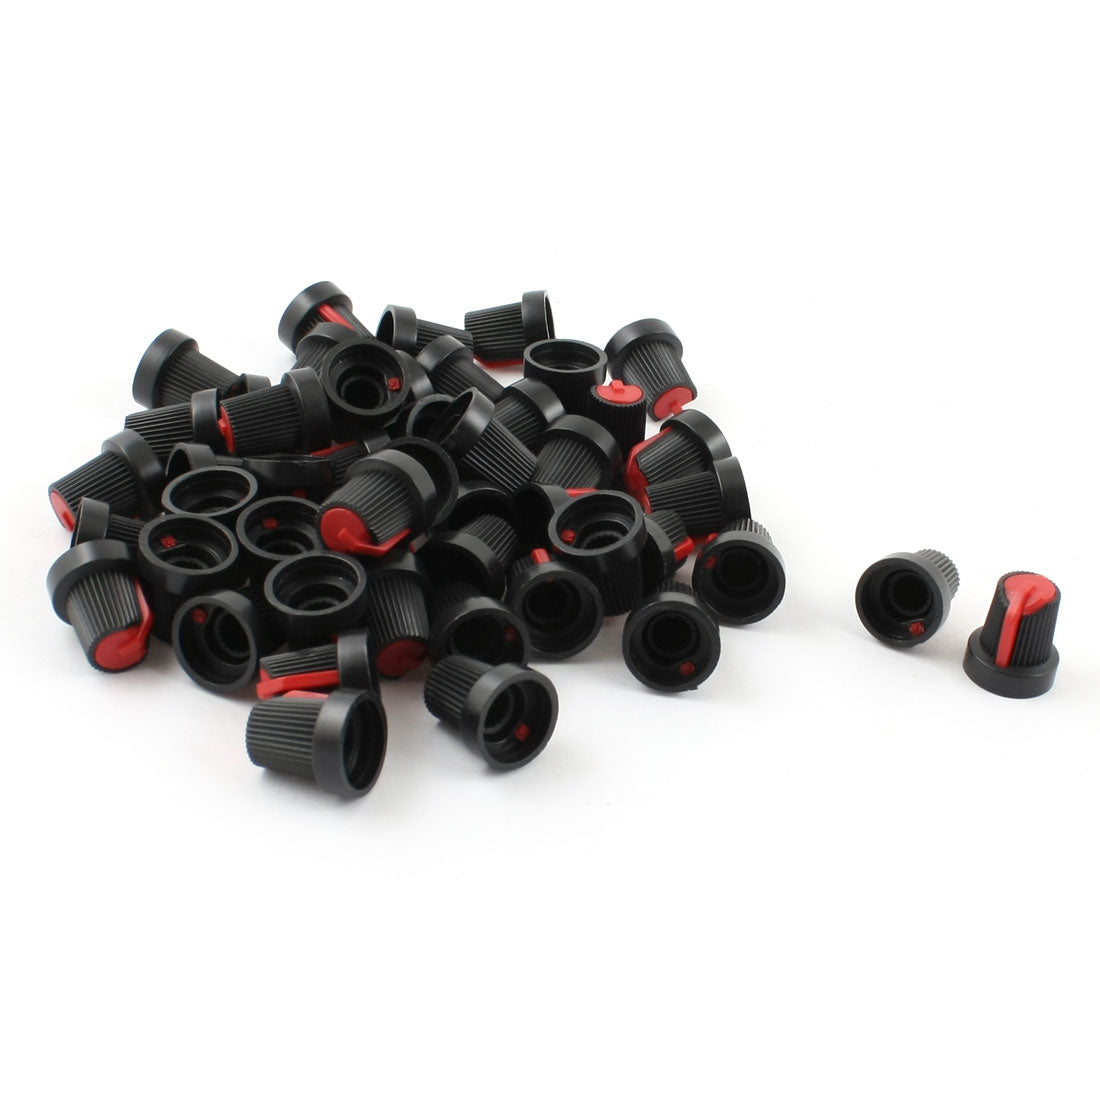 uxcell Uxcell 49pcs 6mm Knurled Shaft Red Top Taper Volume Knob Cap for Potentiometer Pot